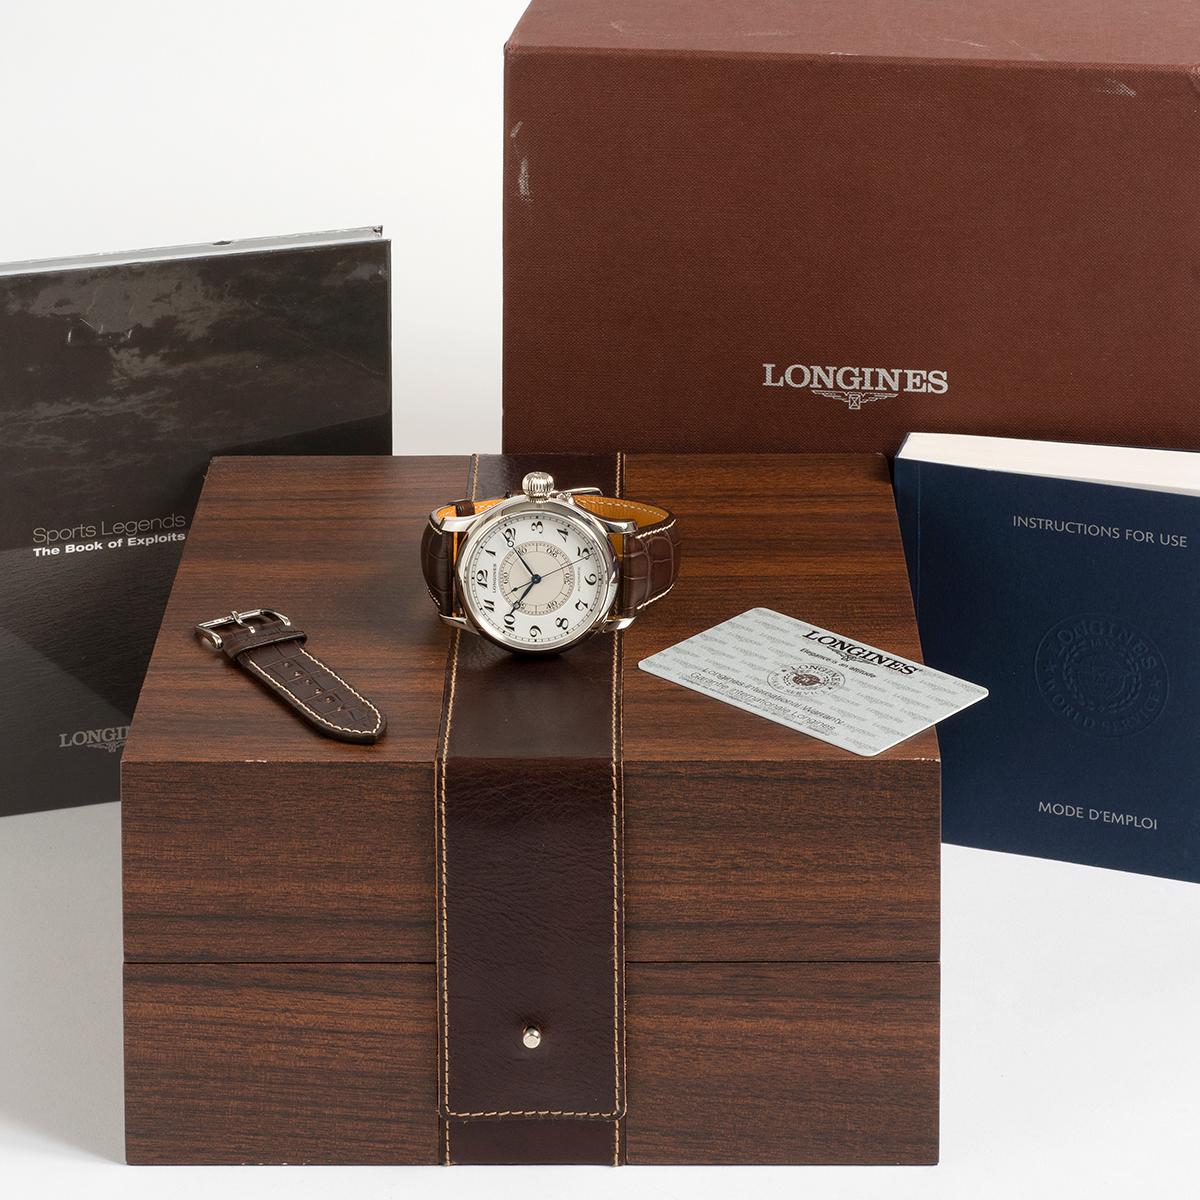 Reference L2.713.4.13.2, is a special re-edition watch from Longines' heritage collection, the Weems Second Setting reference evokes the aviation watches worn by pilots in the early age of aviation and during WW2. The second setting pilot's watch is